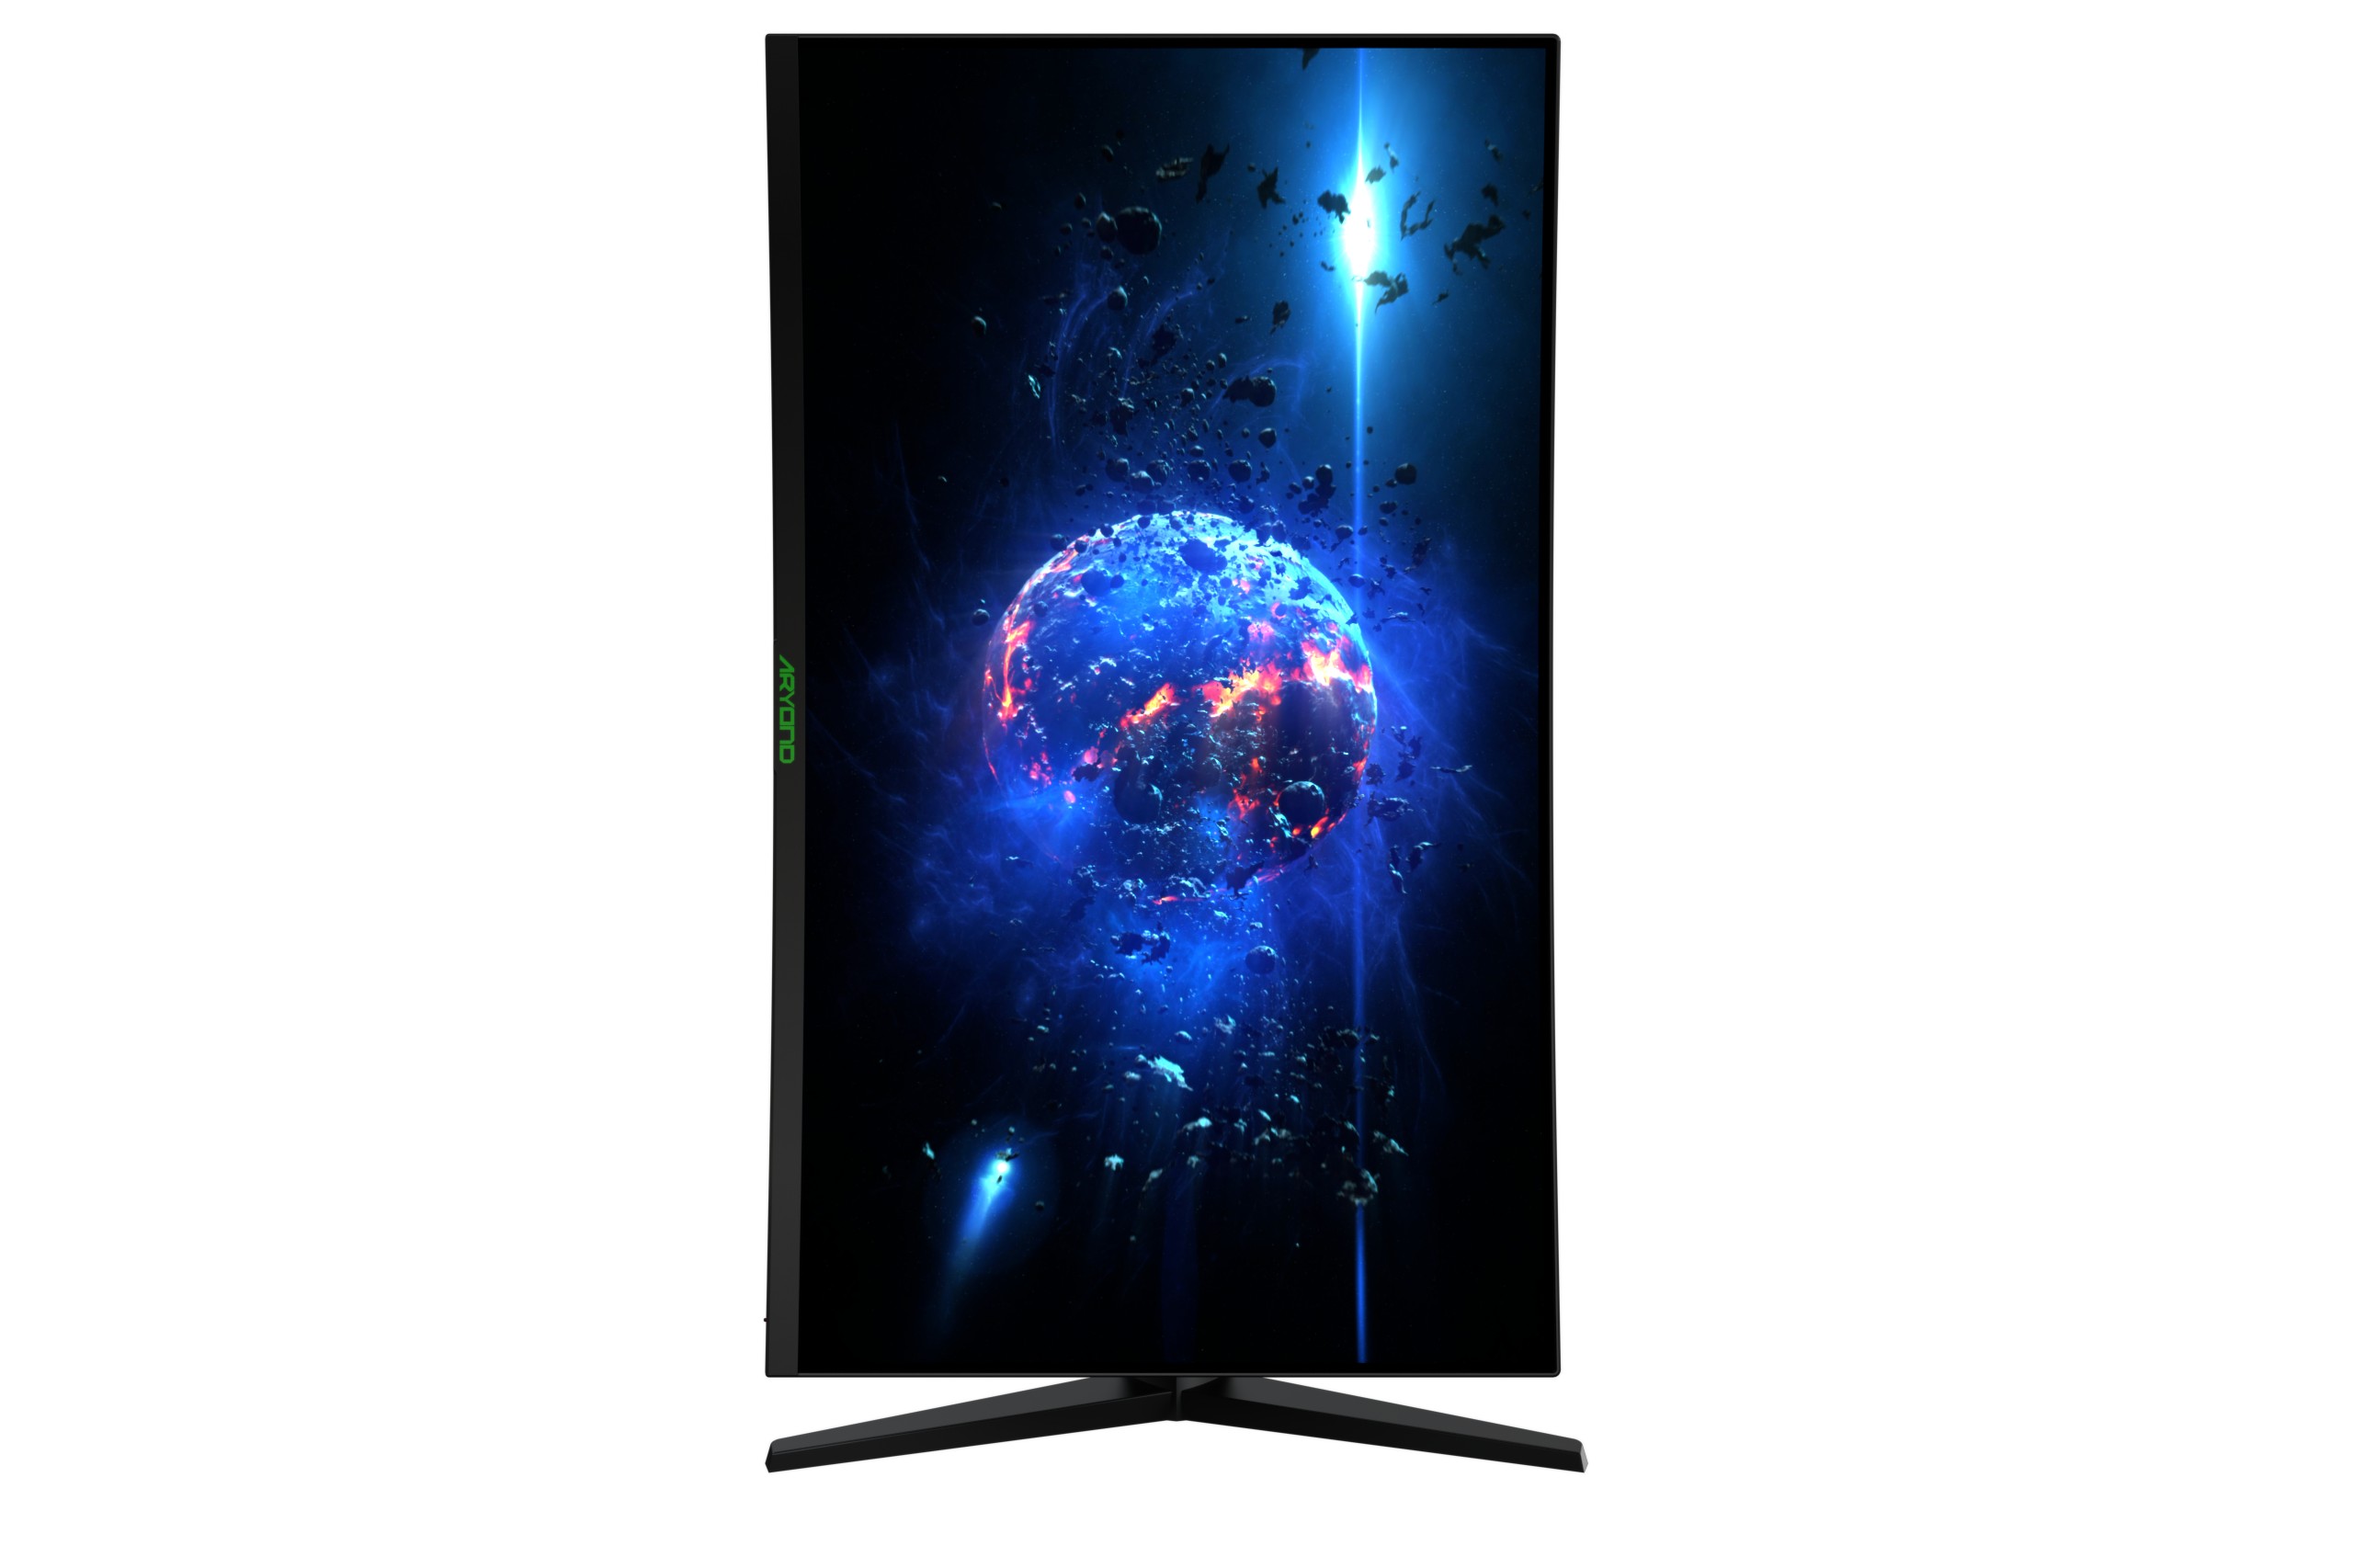 , (1 ARYOND ms A27 Hz 27 ) Zoll Gaming-Monitor Full-HD Reaktionszeit V1.2 240